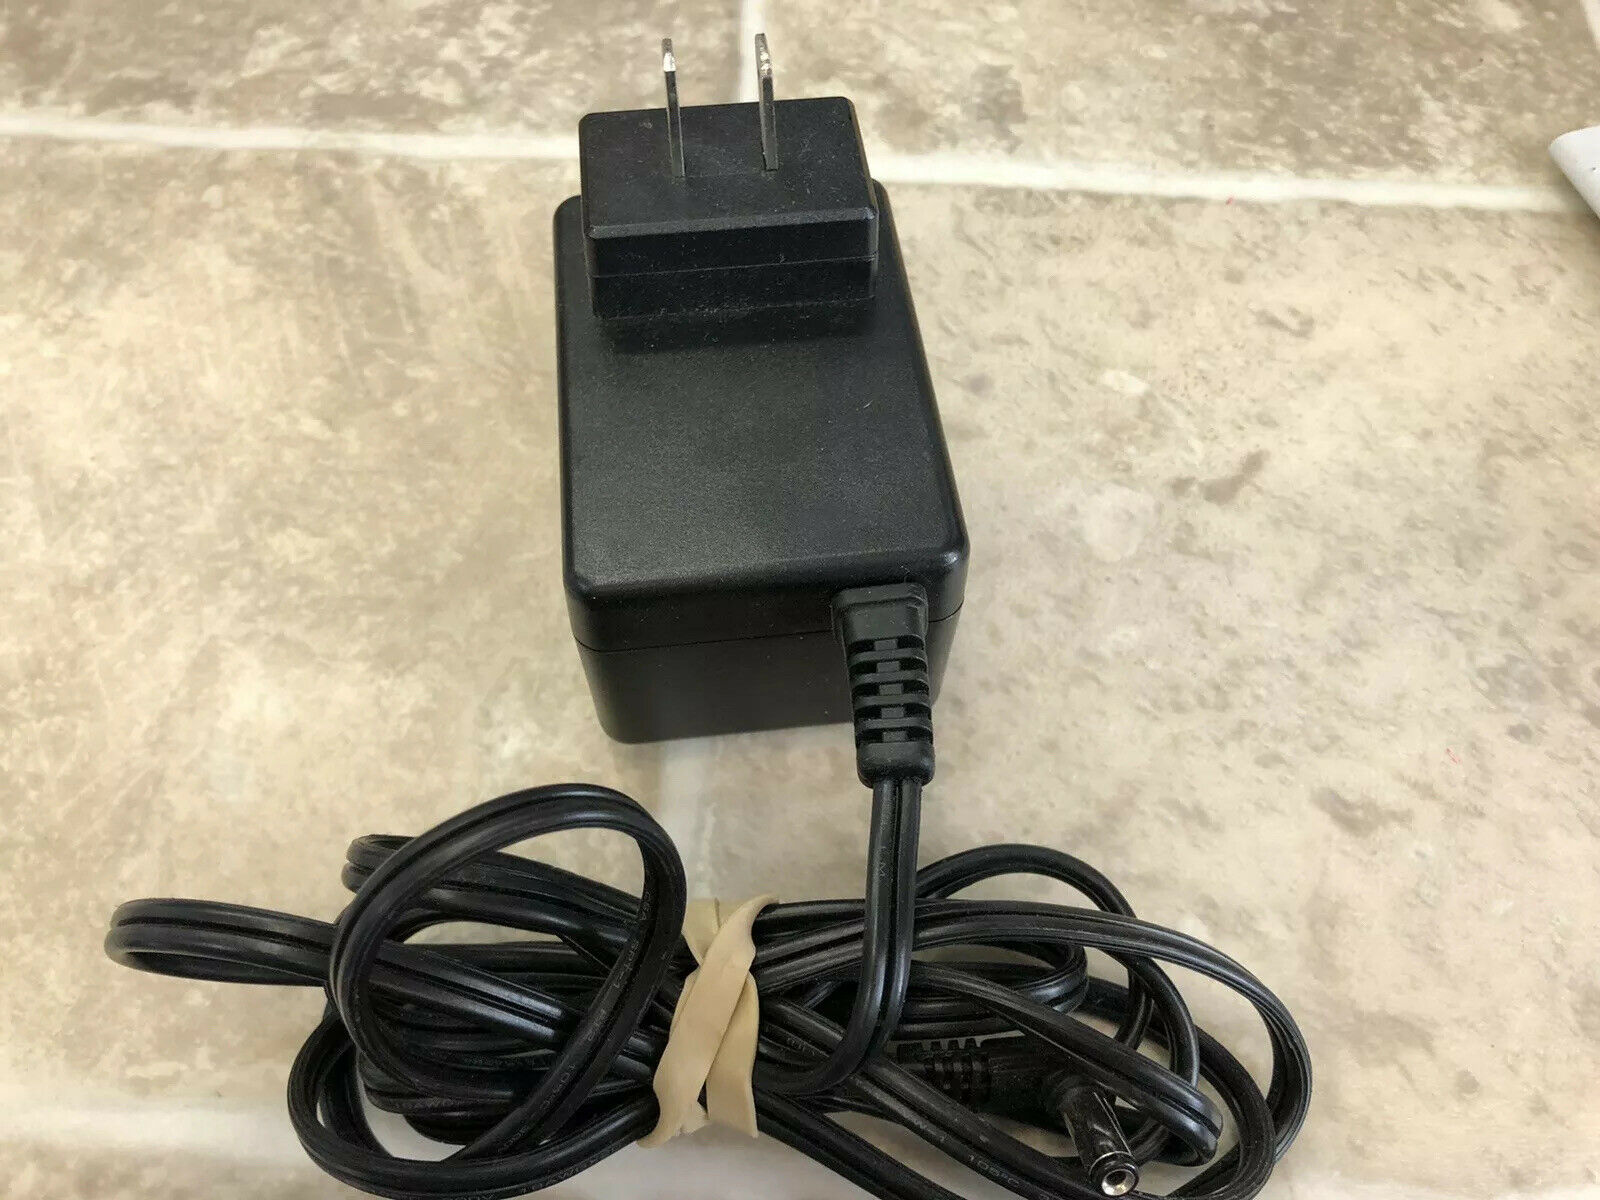 *Brand NEW*Sharper Image SI726 SPP1200240A 12V 2000mA AC DC Adapter POWER SUPPLY